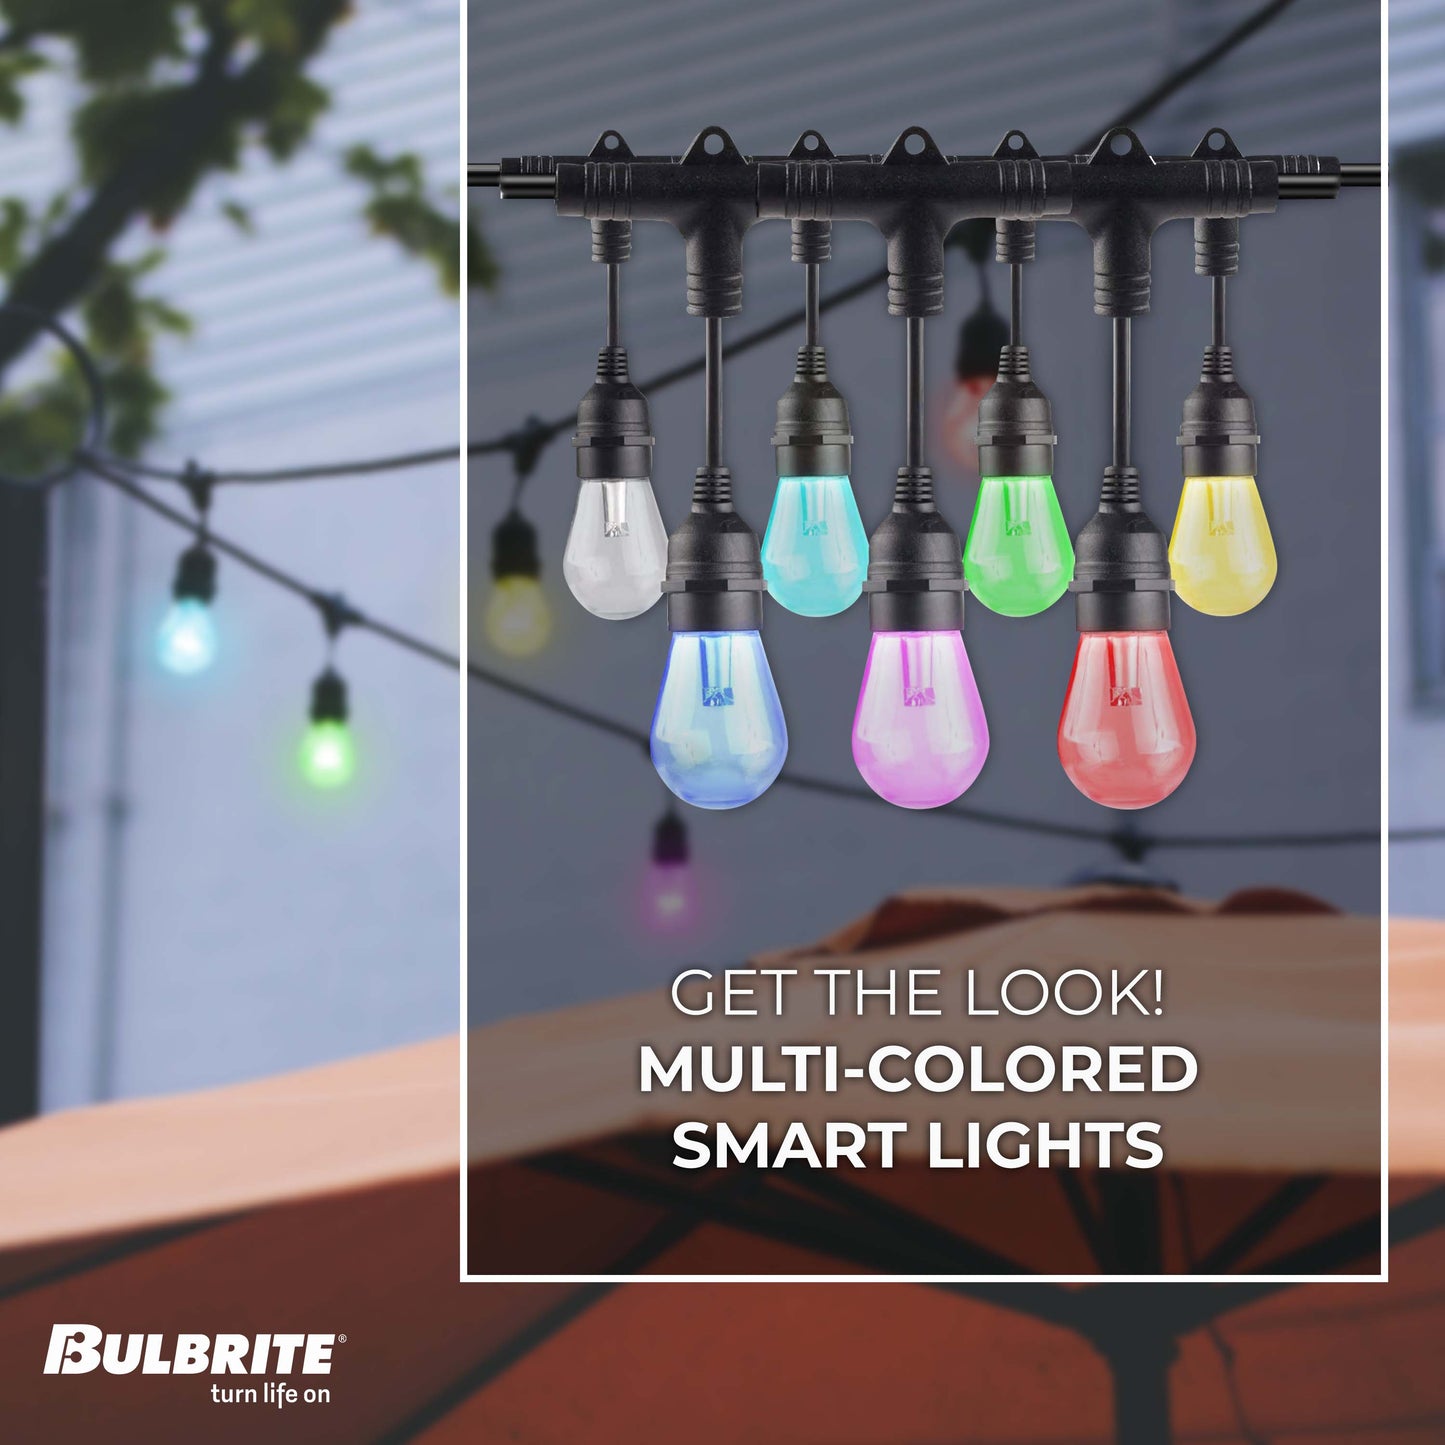 Bulbrite Solana 36-foot Smart String Light Kit with Shatter Resistant RGB Color Changing LED Light Bulbs